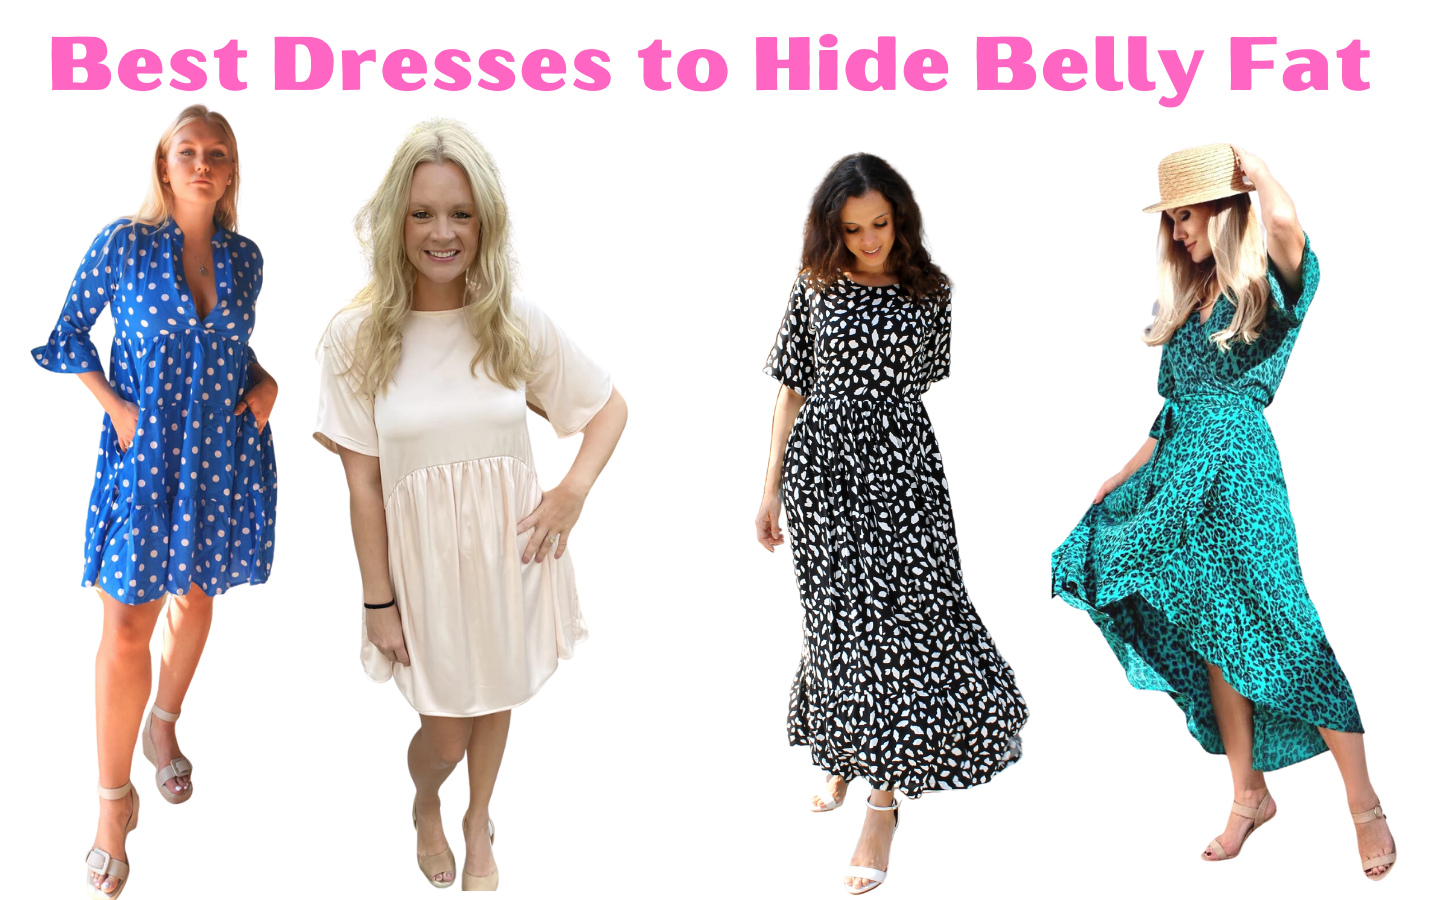 4 Ways to Hide Belly Fat in a Tight Dress - wikiHow